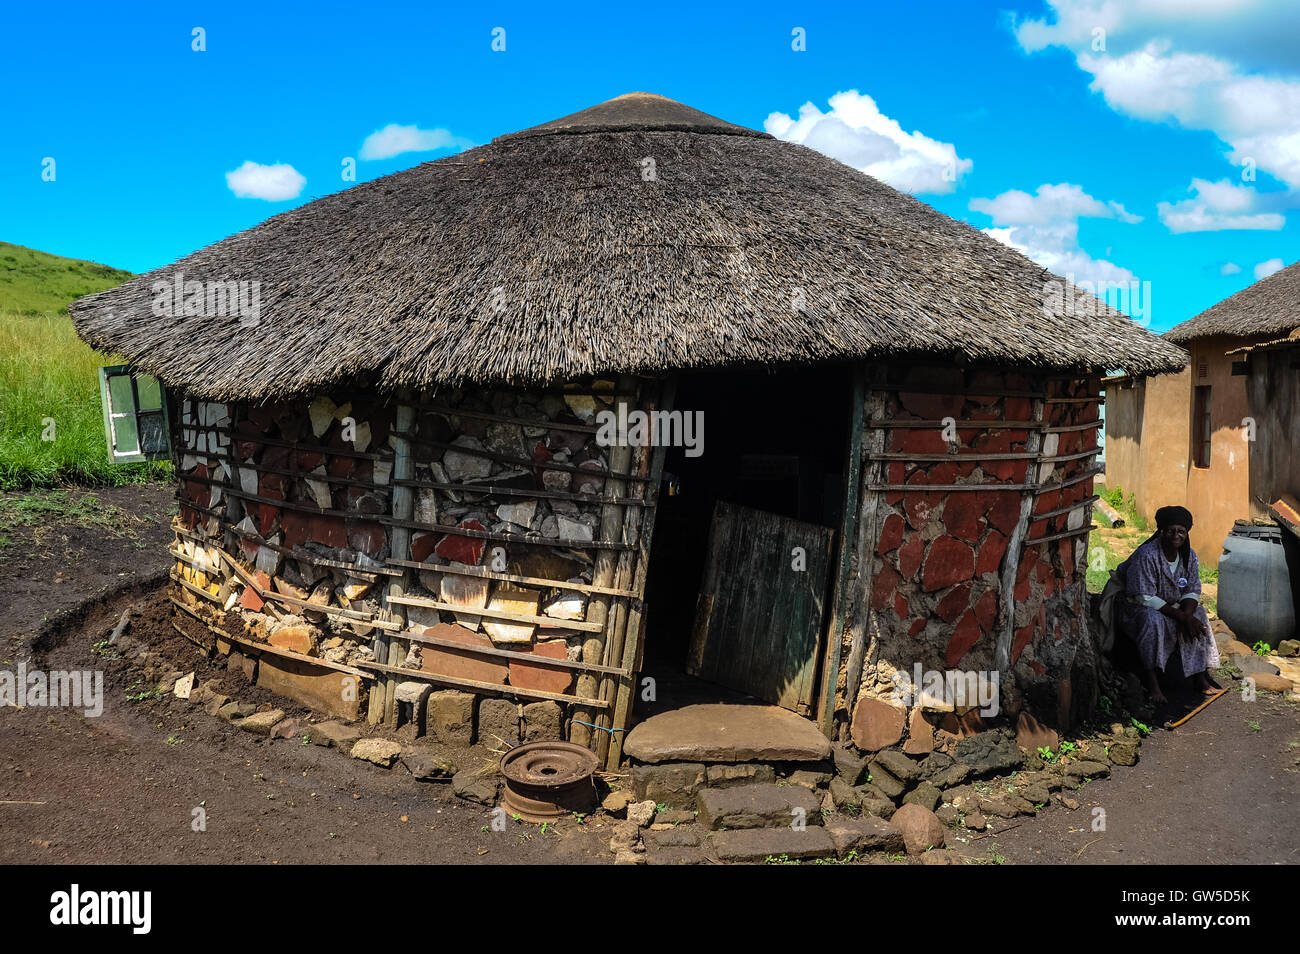 Visiting a small Zulu village near Hluhluwe in the KwaZulu-Natal province, South Africa. An old lady sitting outside the kitchen. Stock Photo